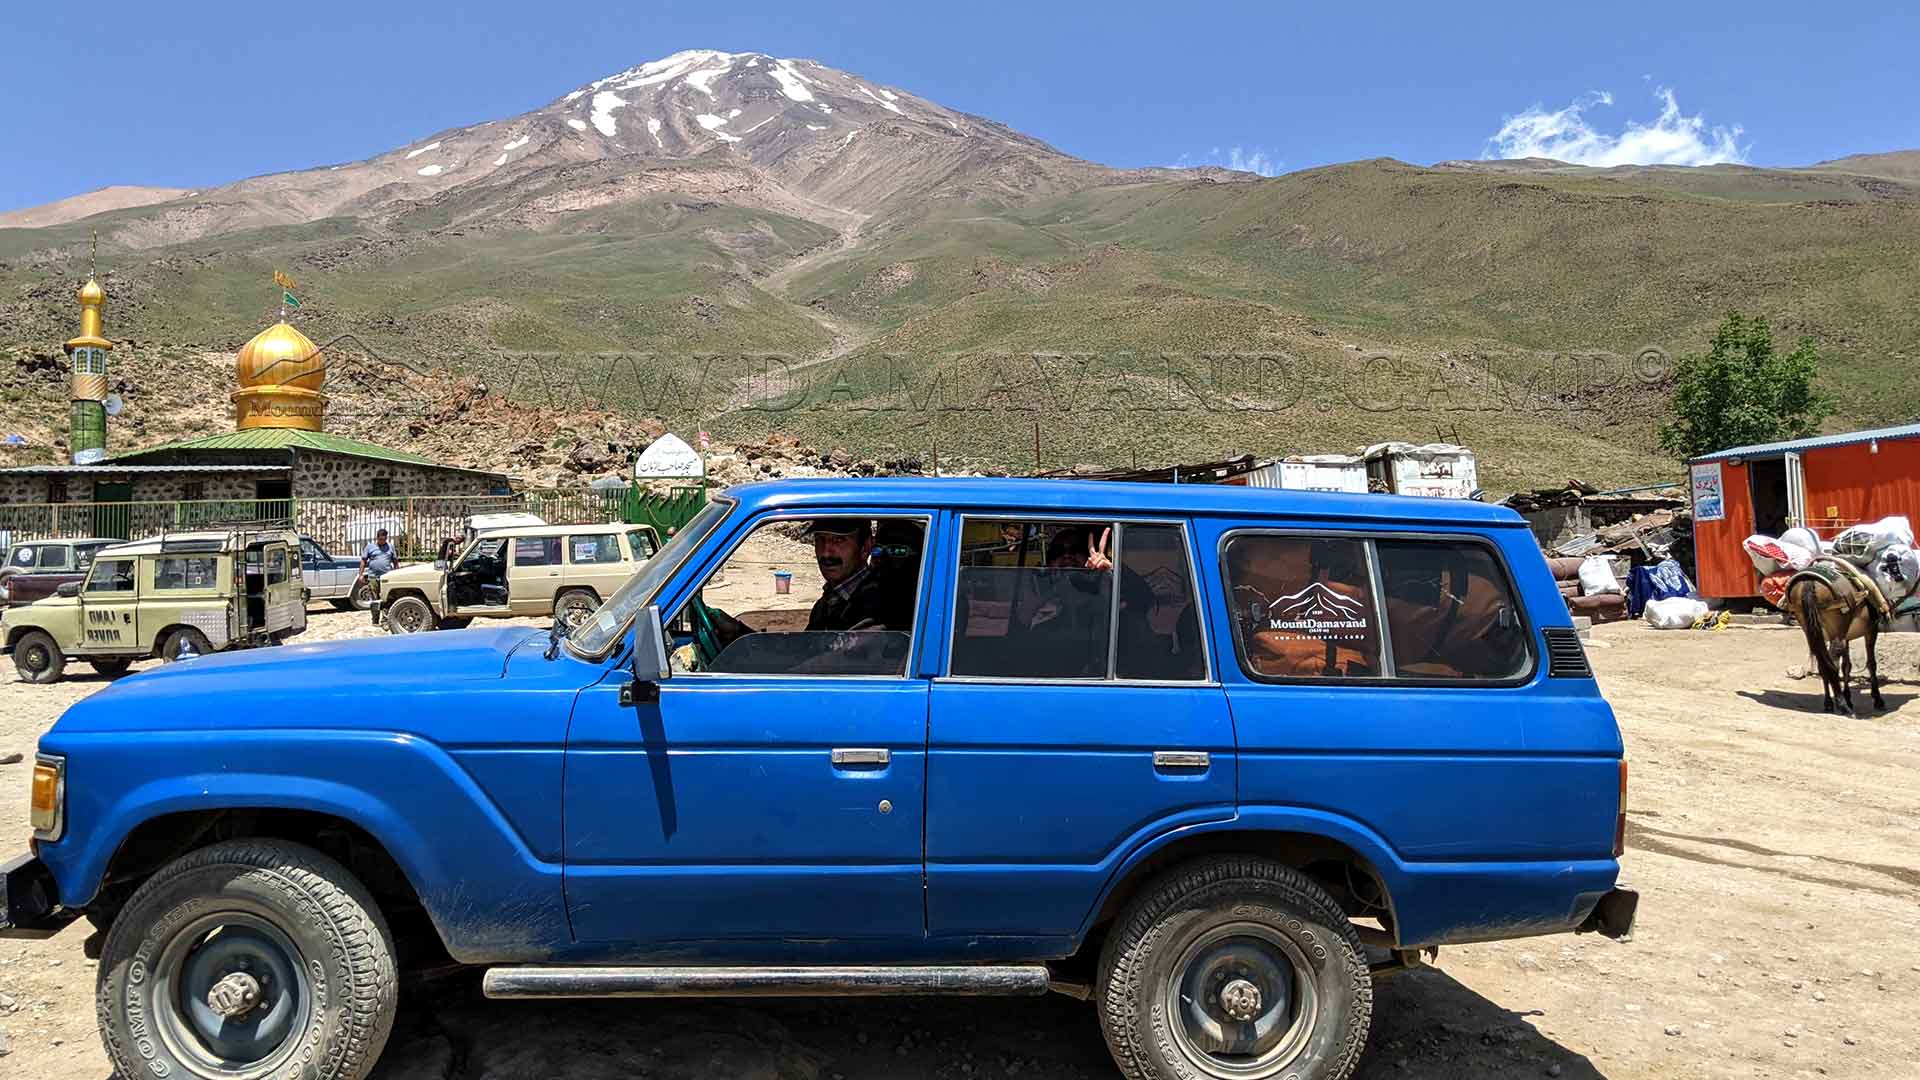 Our robust 4WD transport service stationed at Camp 2 of Damavand.